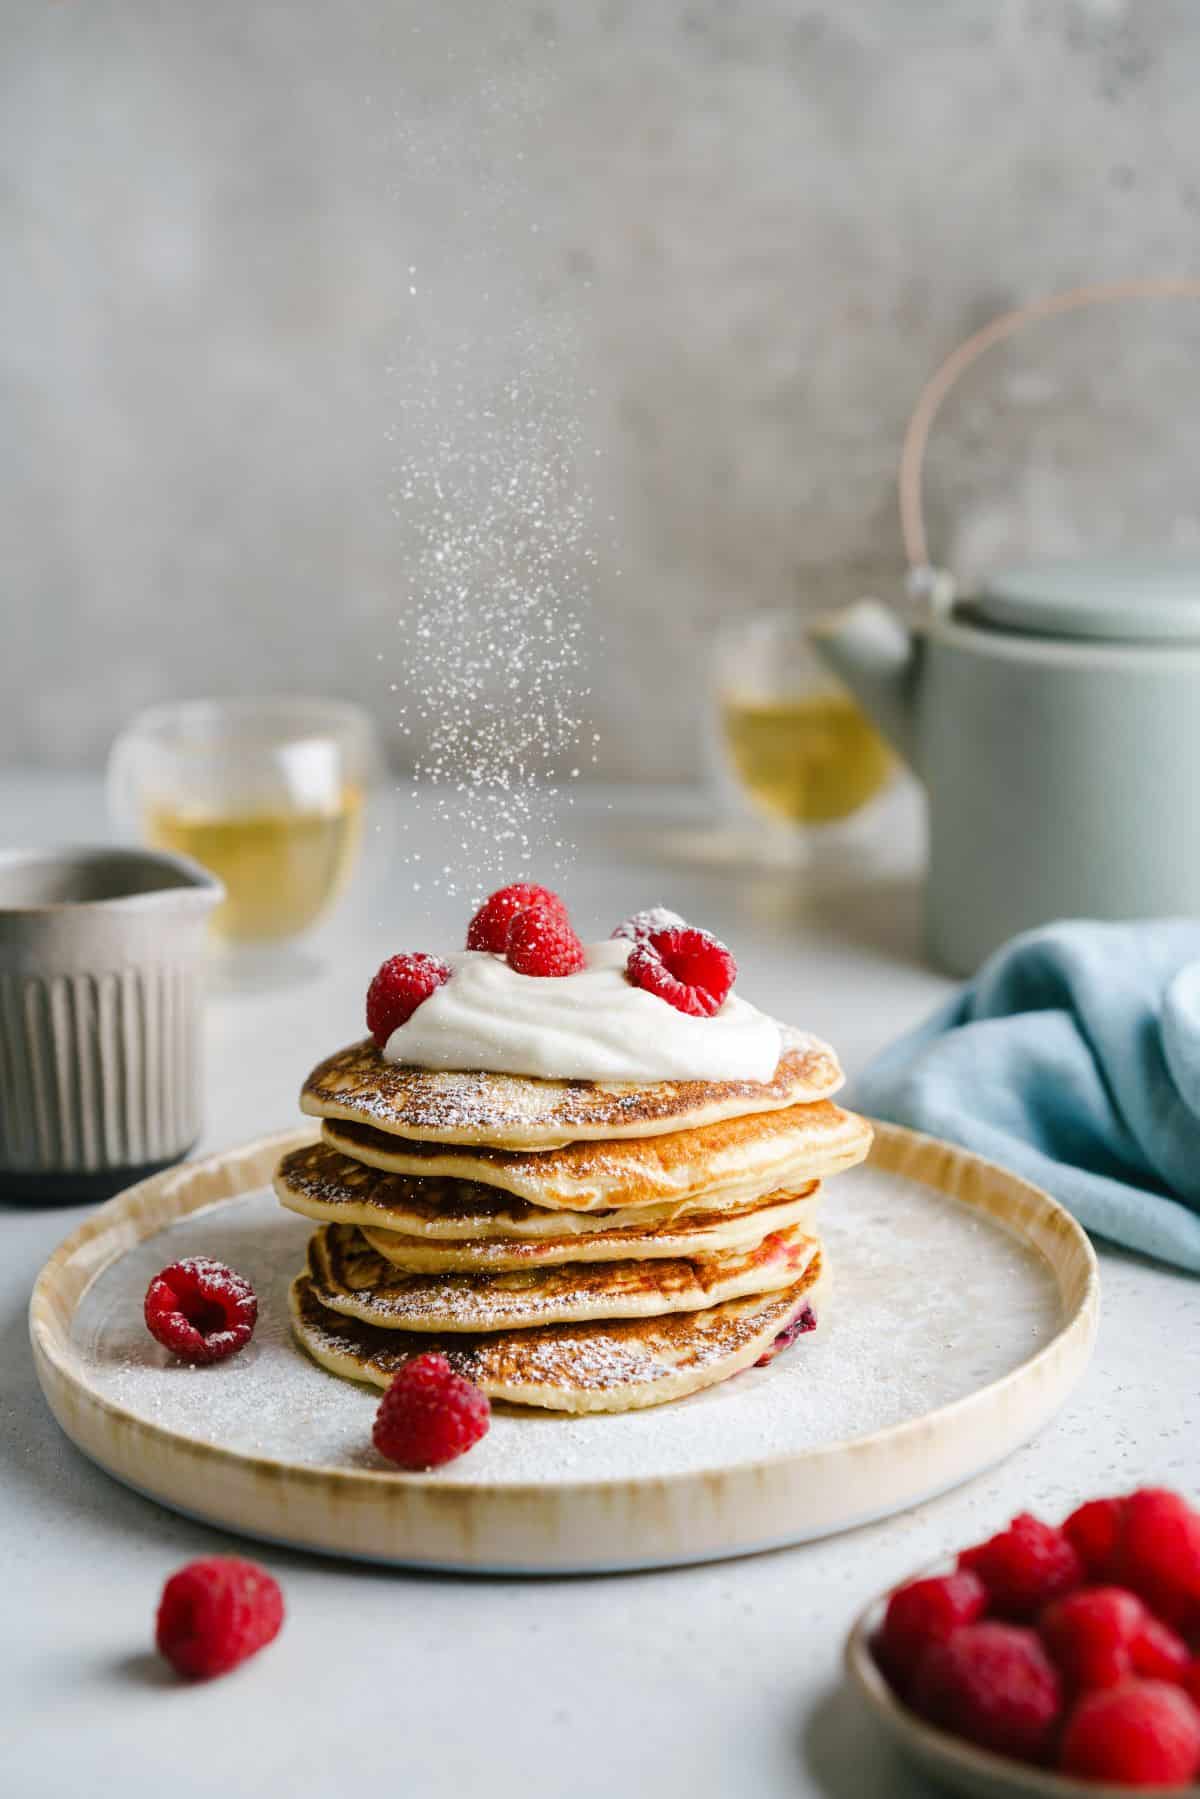 A stack of pancakes with fruit and cream sauce on a plate, being dusted with powdered sugar.